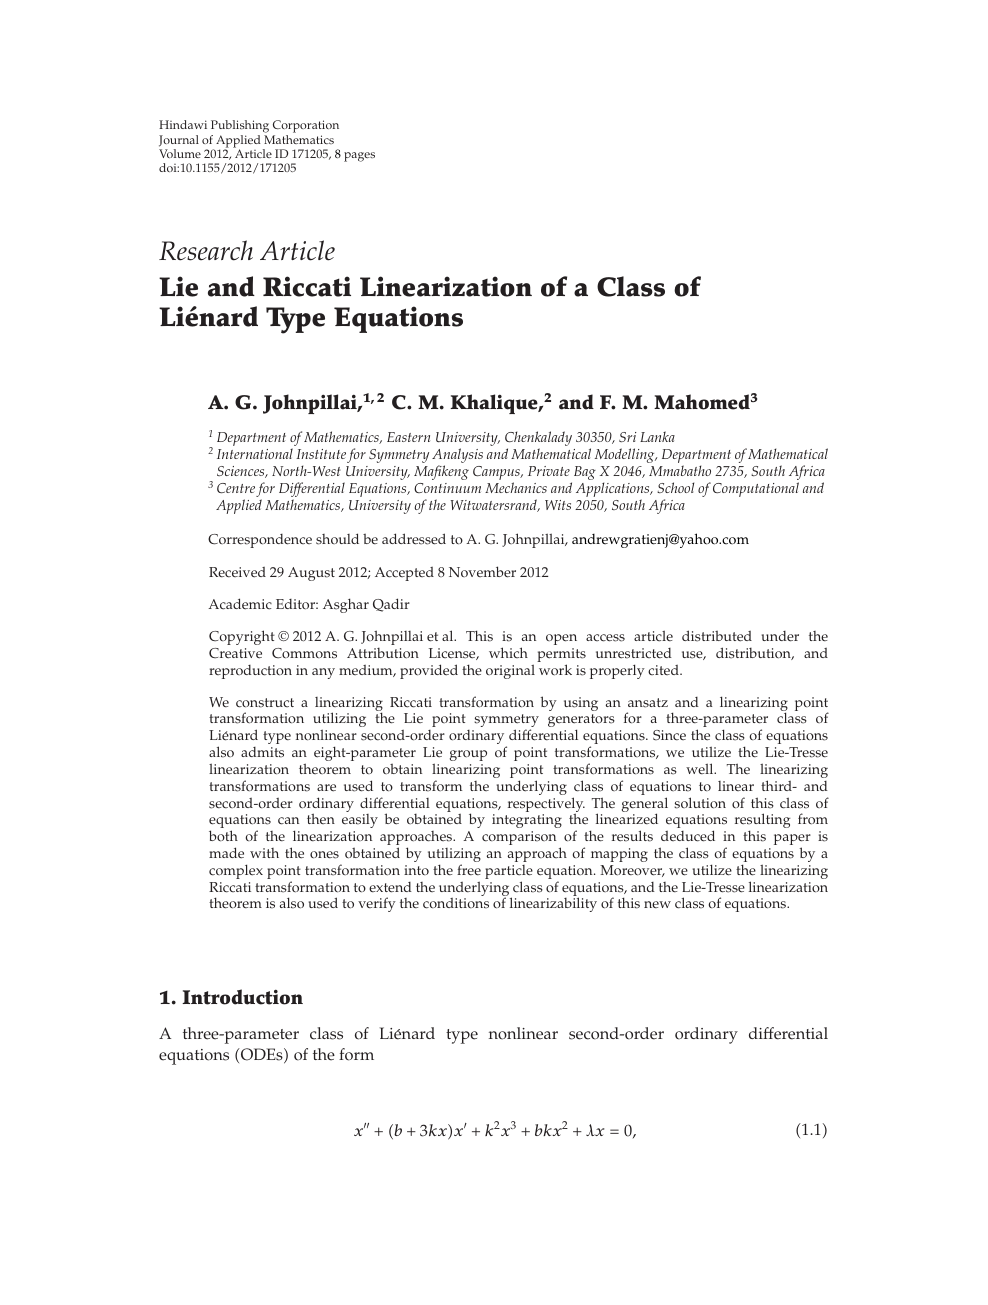 Lie And Riccati Linearization Of A Class Of Lienard Type Equations Topic Of Research Paper In Mathematics Download Scholarly Article Pdf And Read For Free On Cyberleninka Open Science Hub